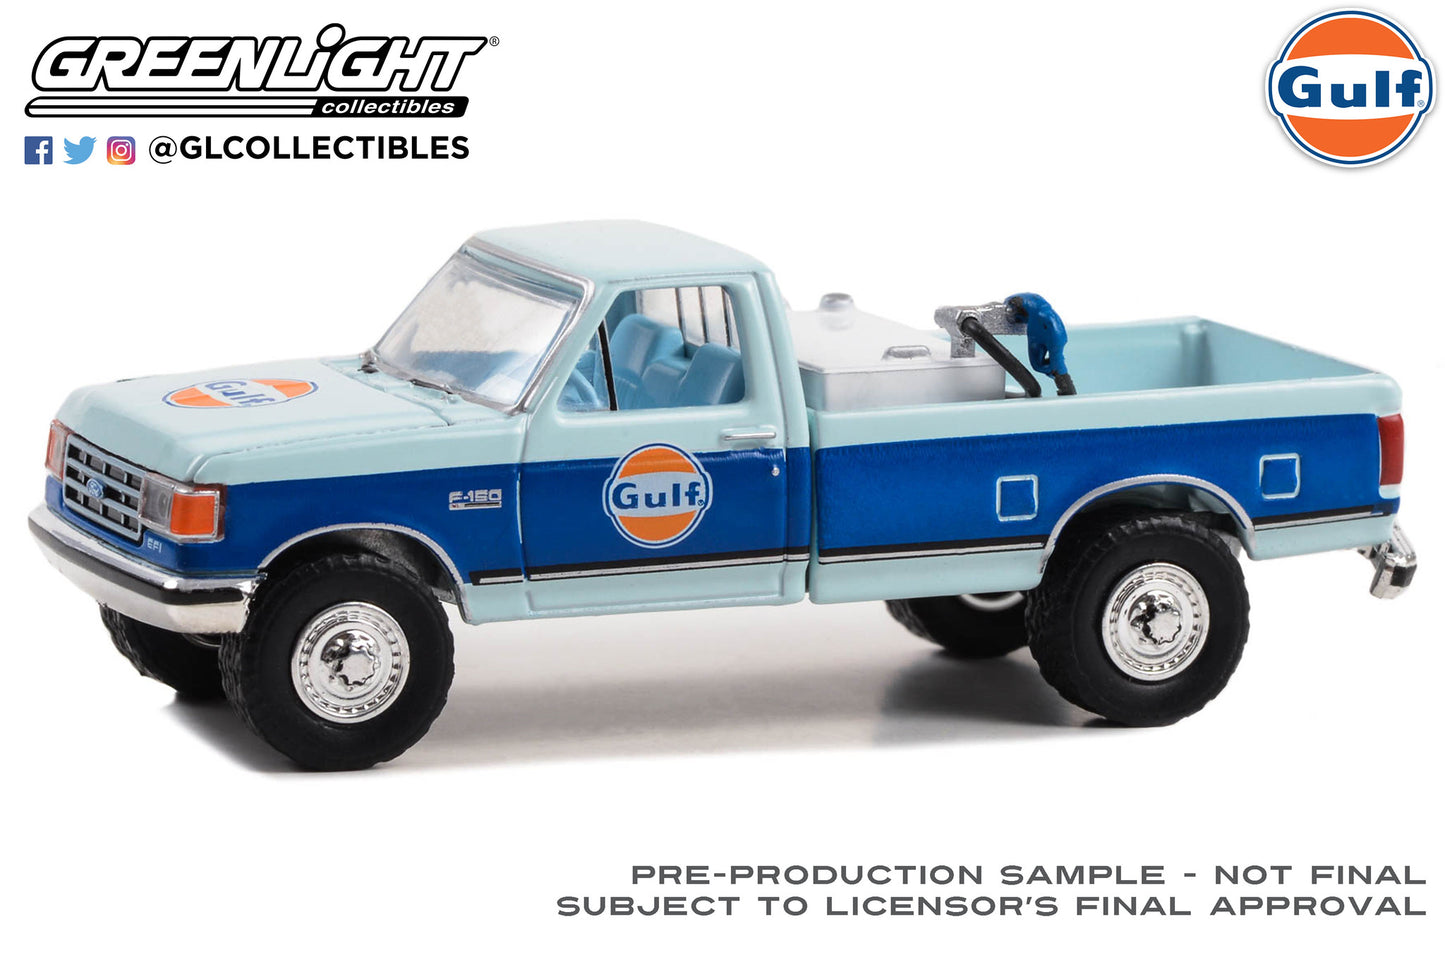 GreenLight 1:64 Gulf Oil Special Edition Series 2 - 1990 Ford F-150 with Fuel Transfer Tank 41145-E